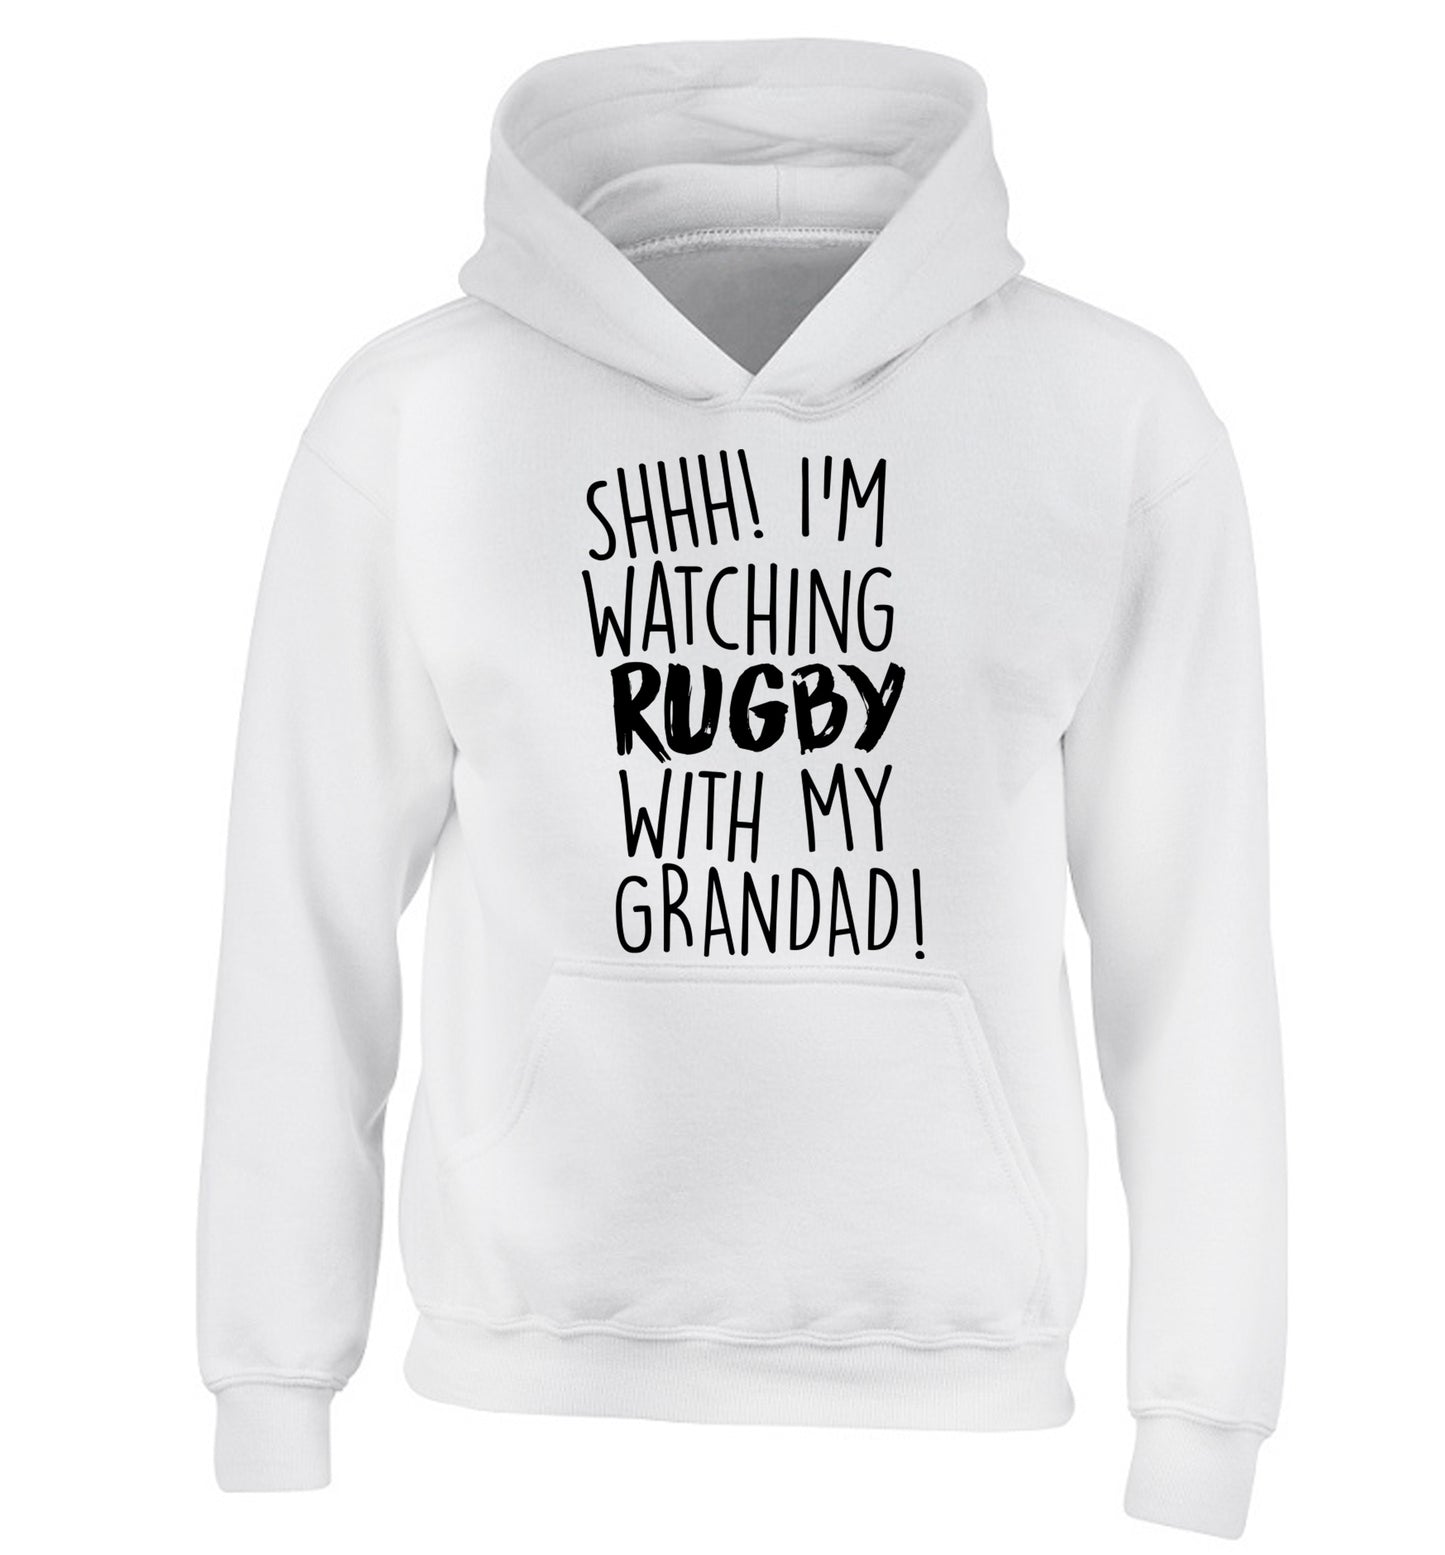 Shh I'm watching rugby with my grandaughter children's white hoodie 12-13 Years